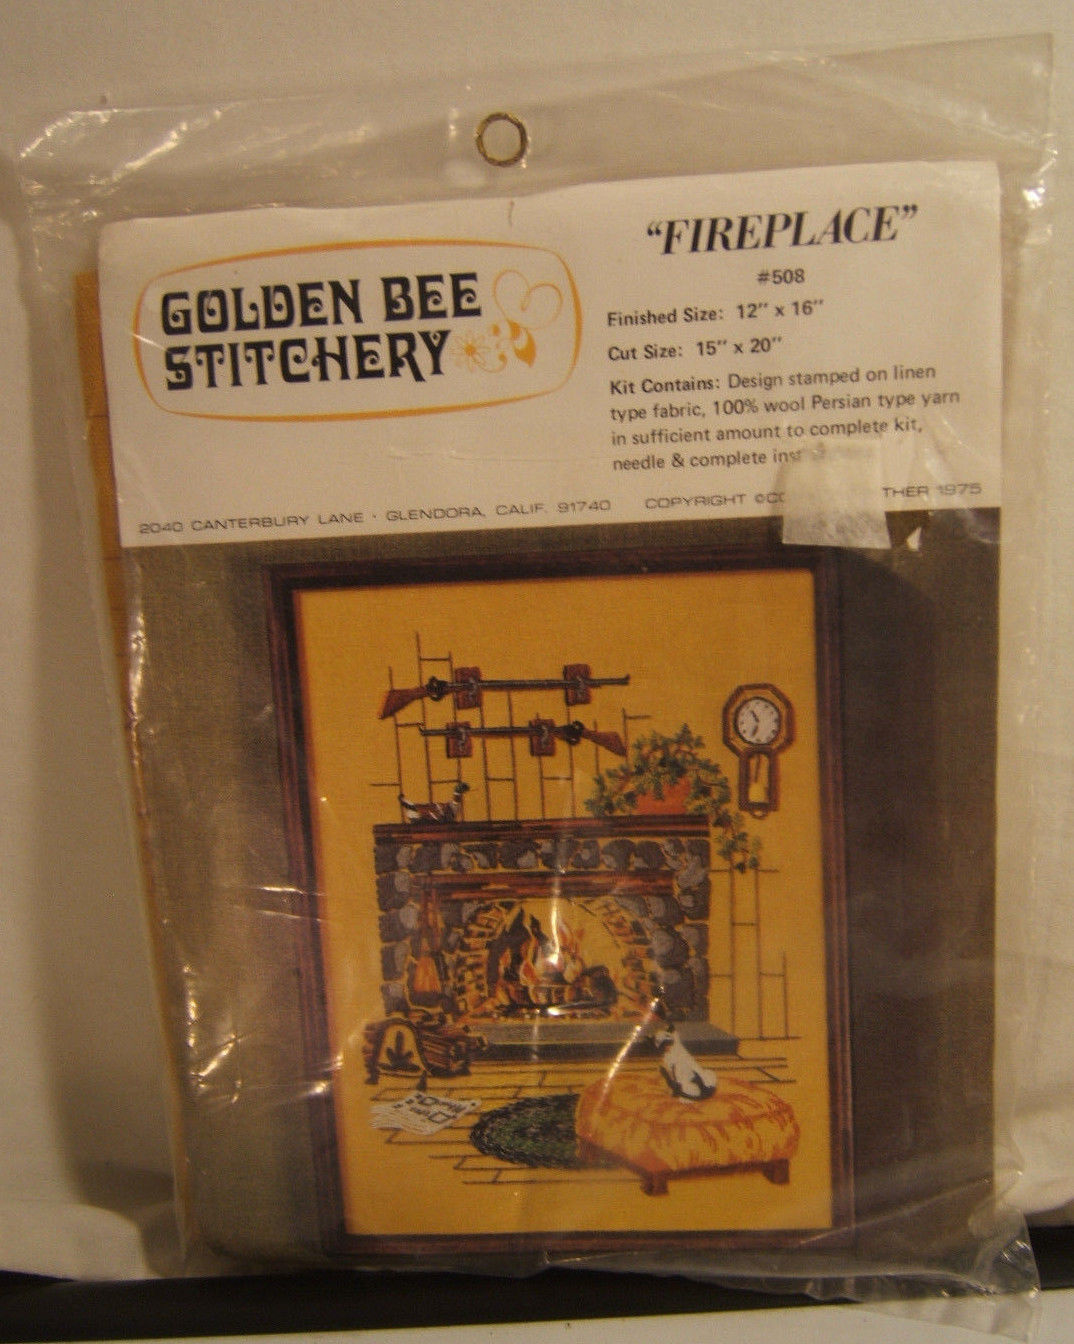 Primary image for Vintage 1975 Golden Bee Stitchery Fireplace #508 Embroidery  Kit 15" x 20" USA